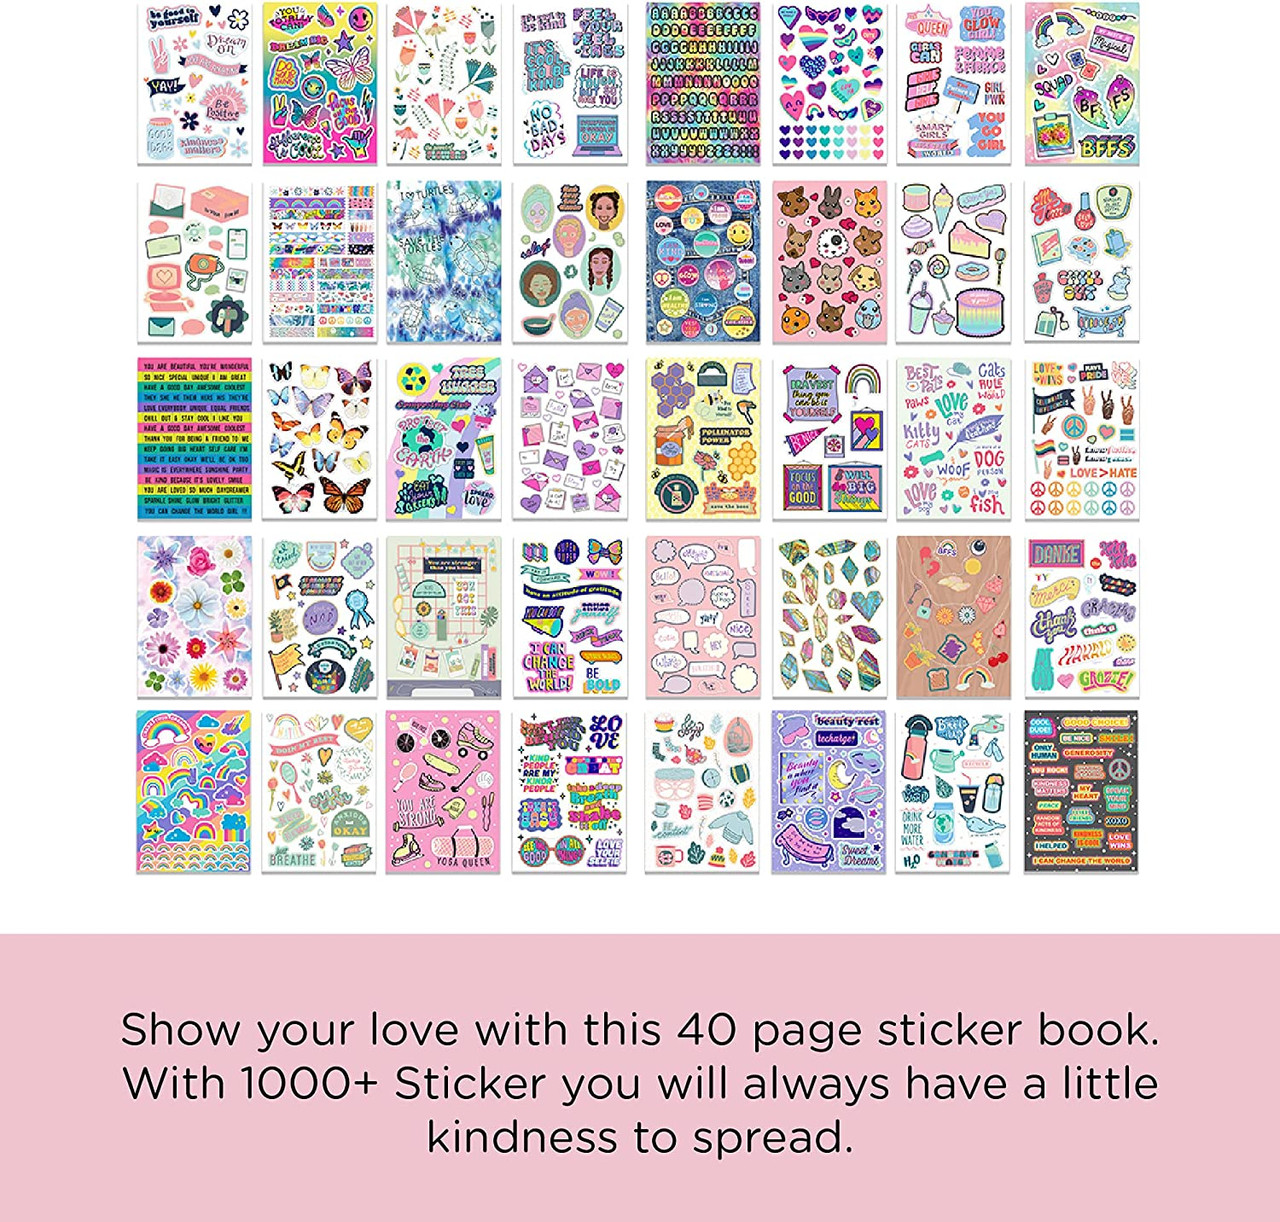 1000+ Spread Kindness Stickers for Kids - Fun Craft Stickers for